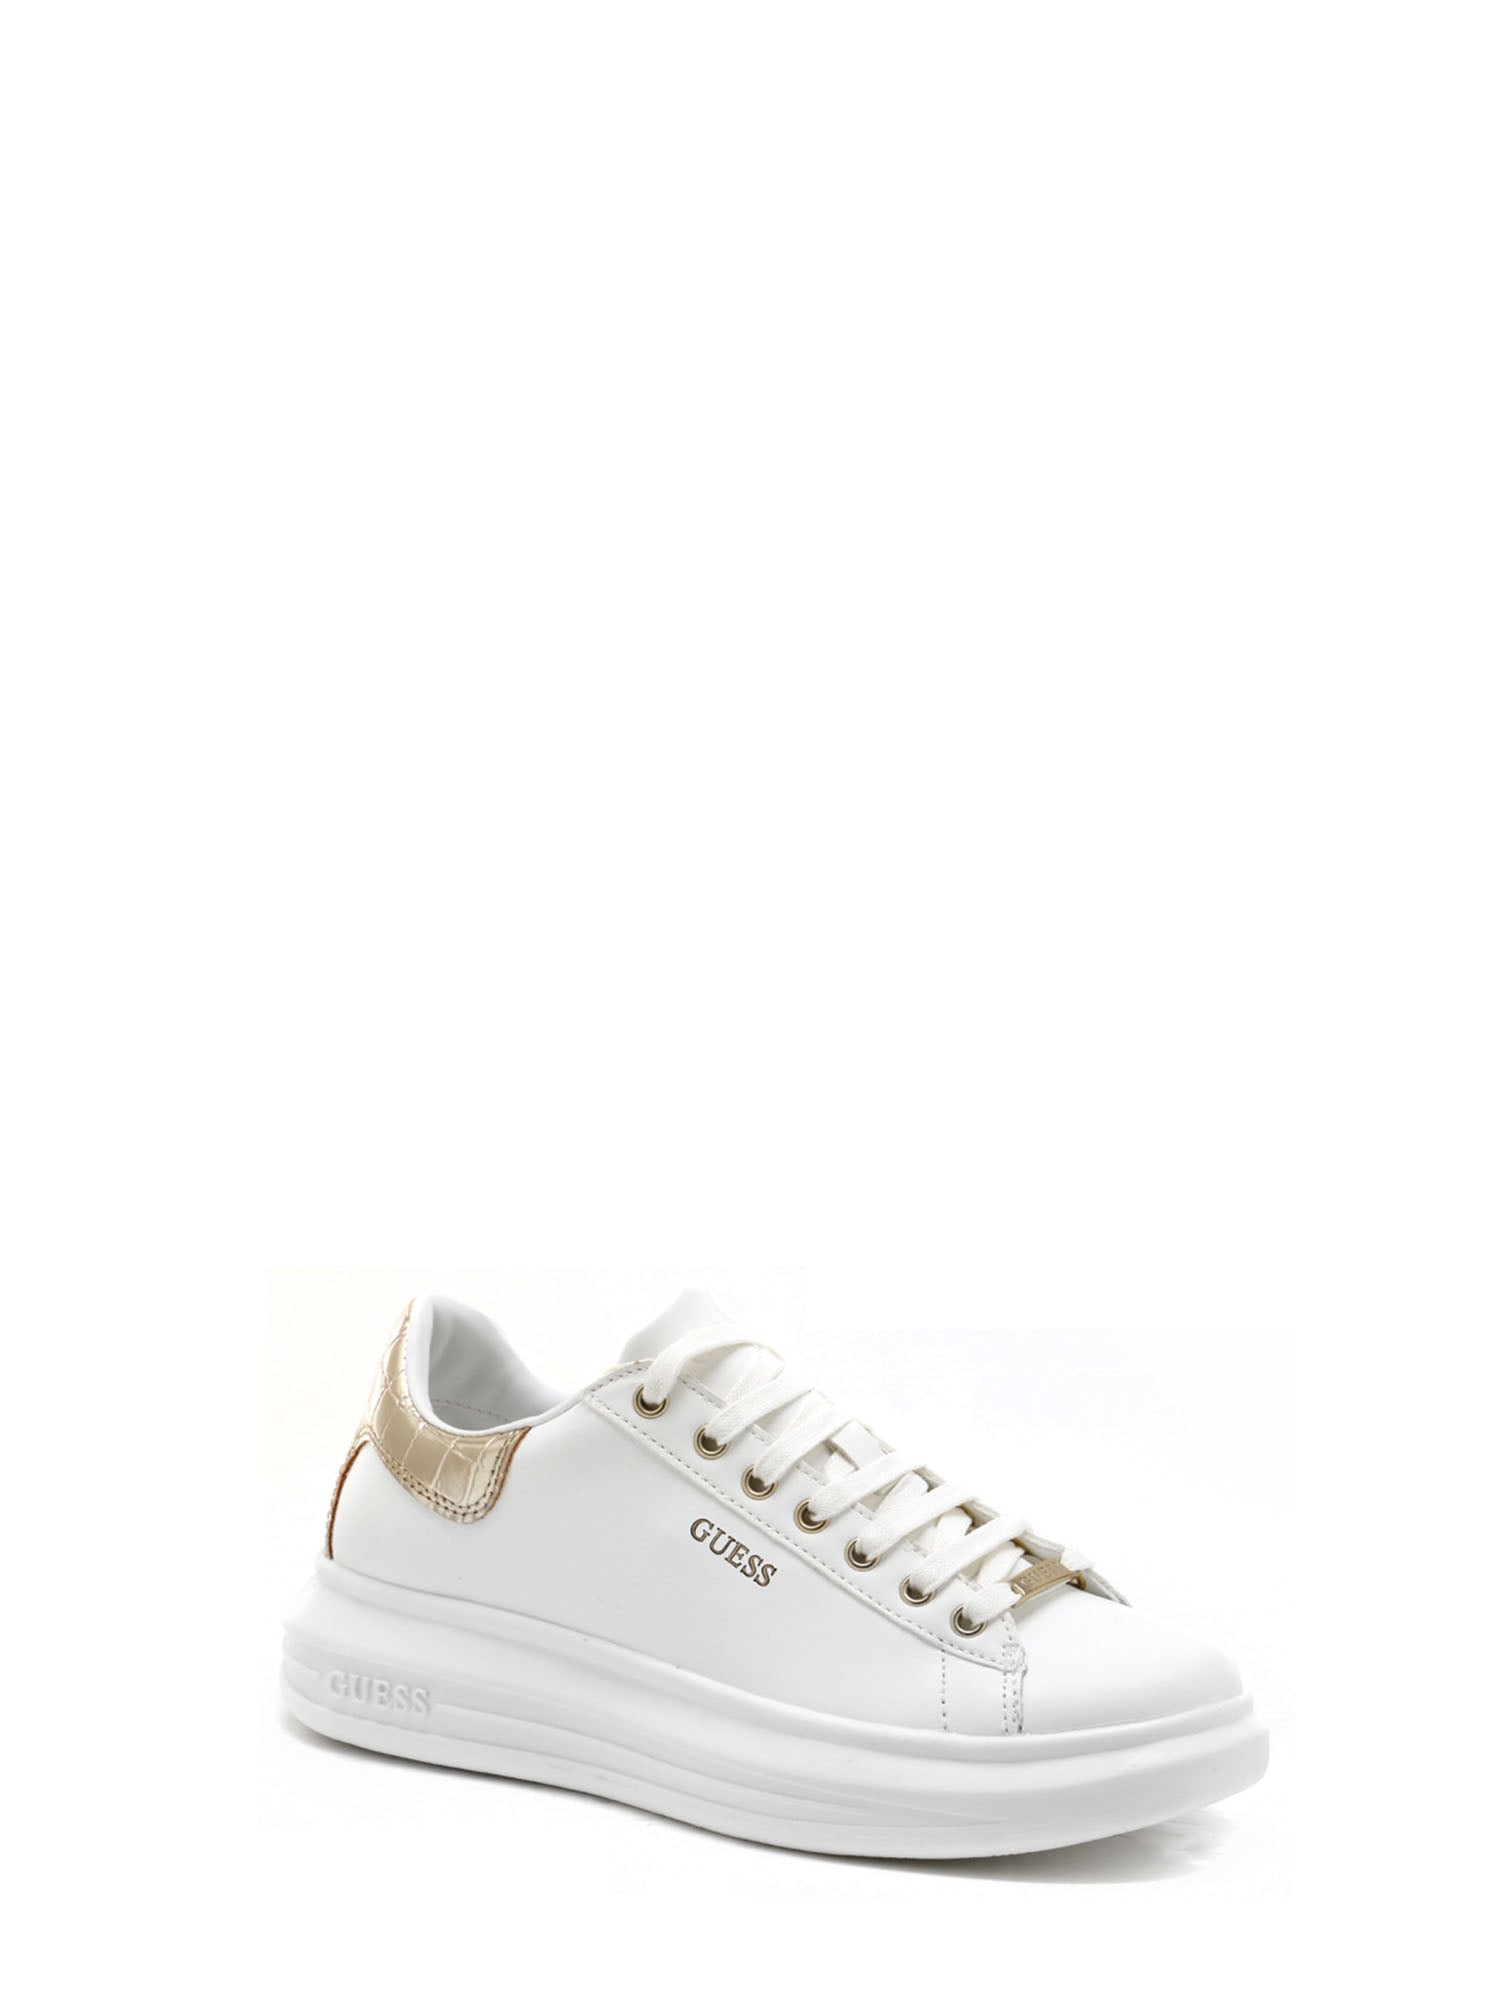 GUESS JEANS SNEAKERS SALERNO BIANCO - ORO